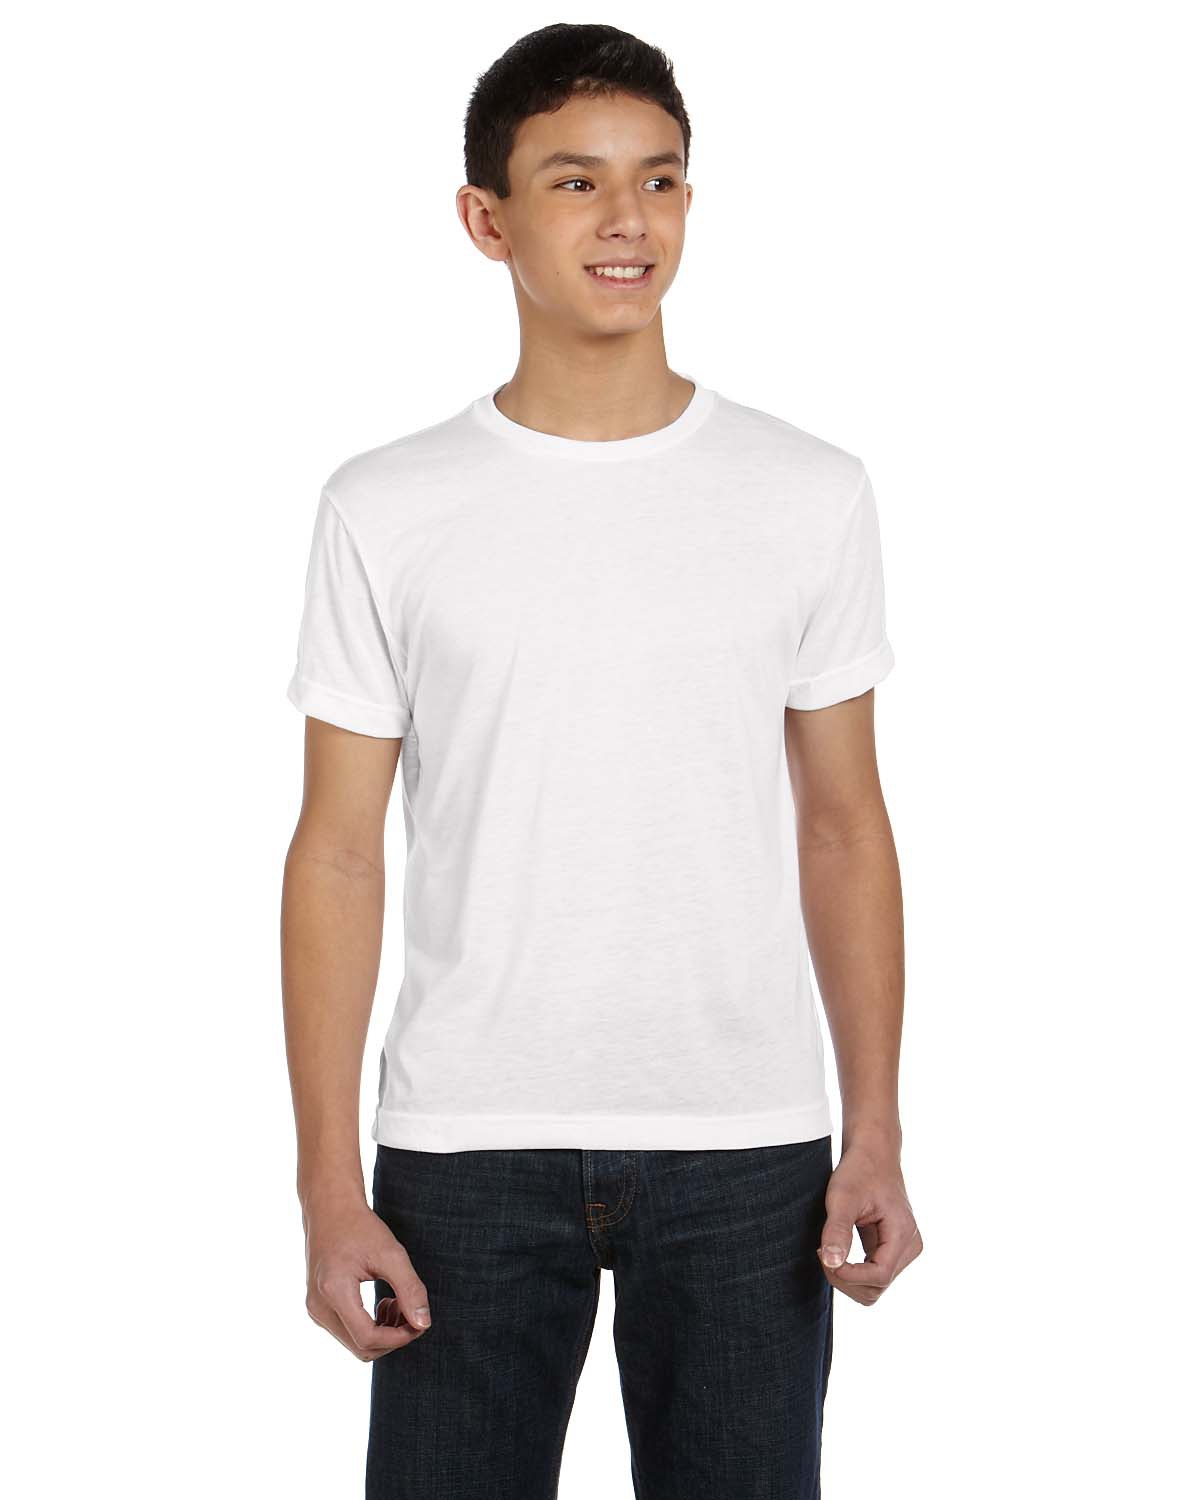 SubliVie 1210-Youth Polyester T-Shirt